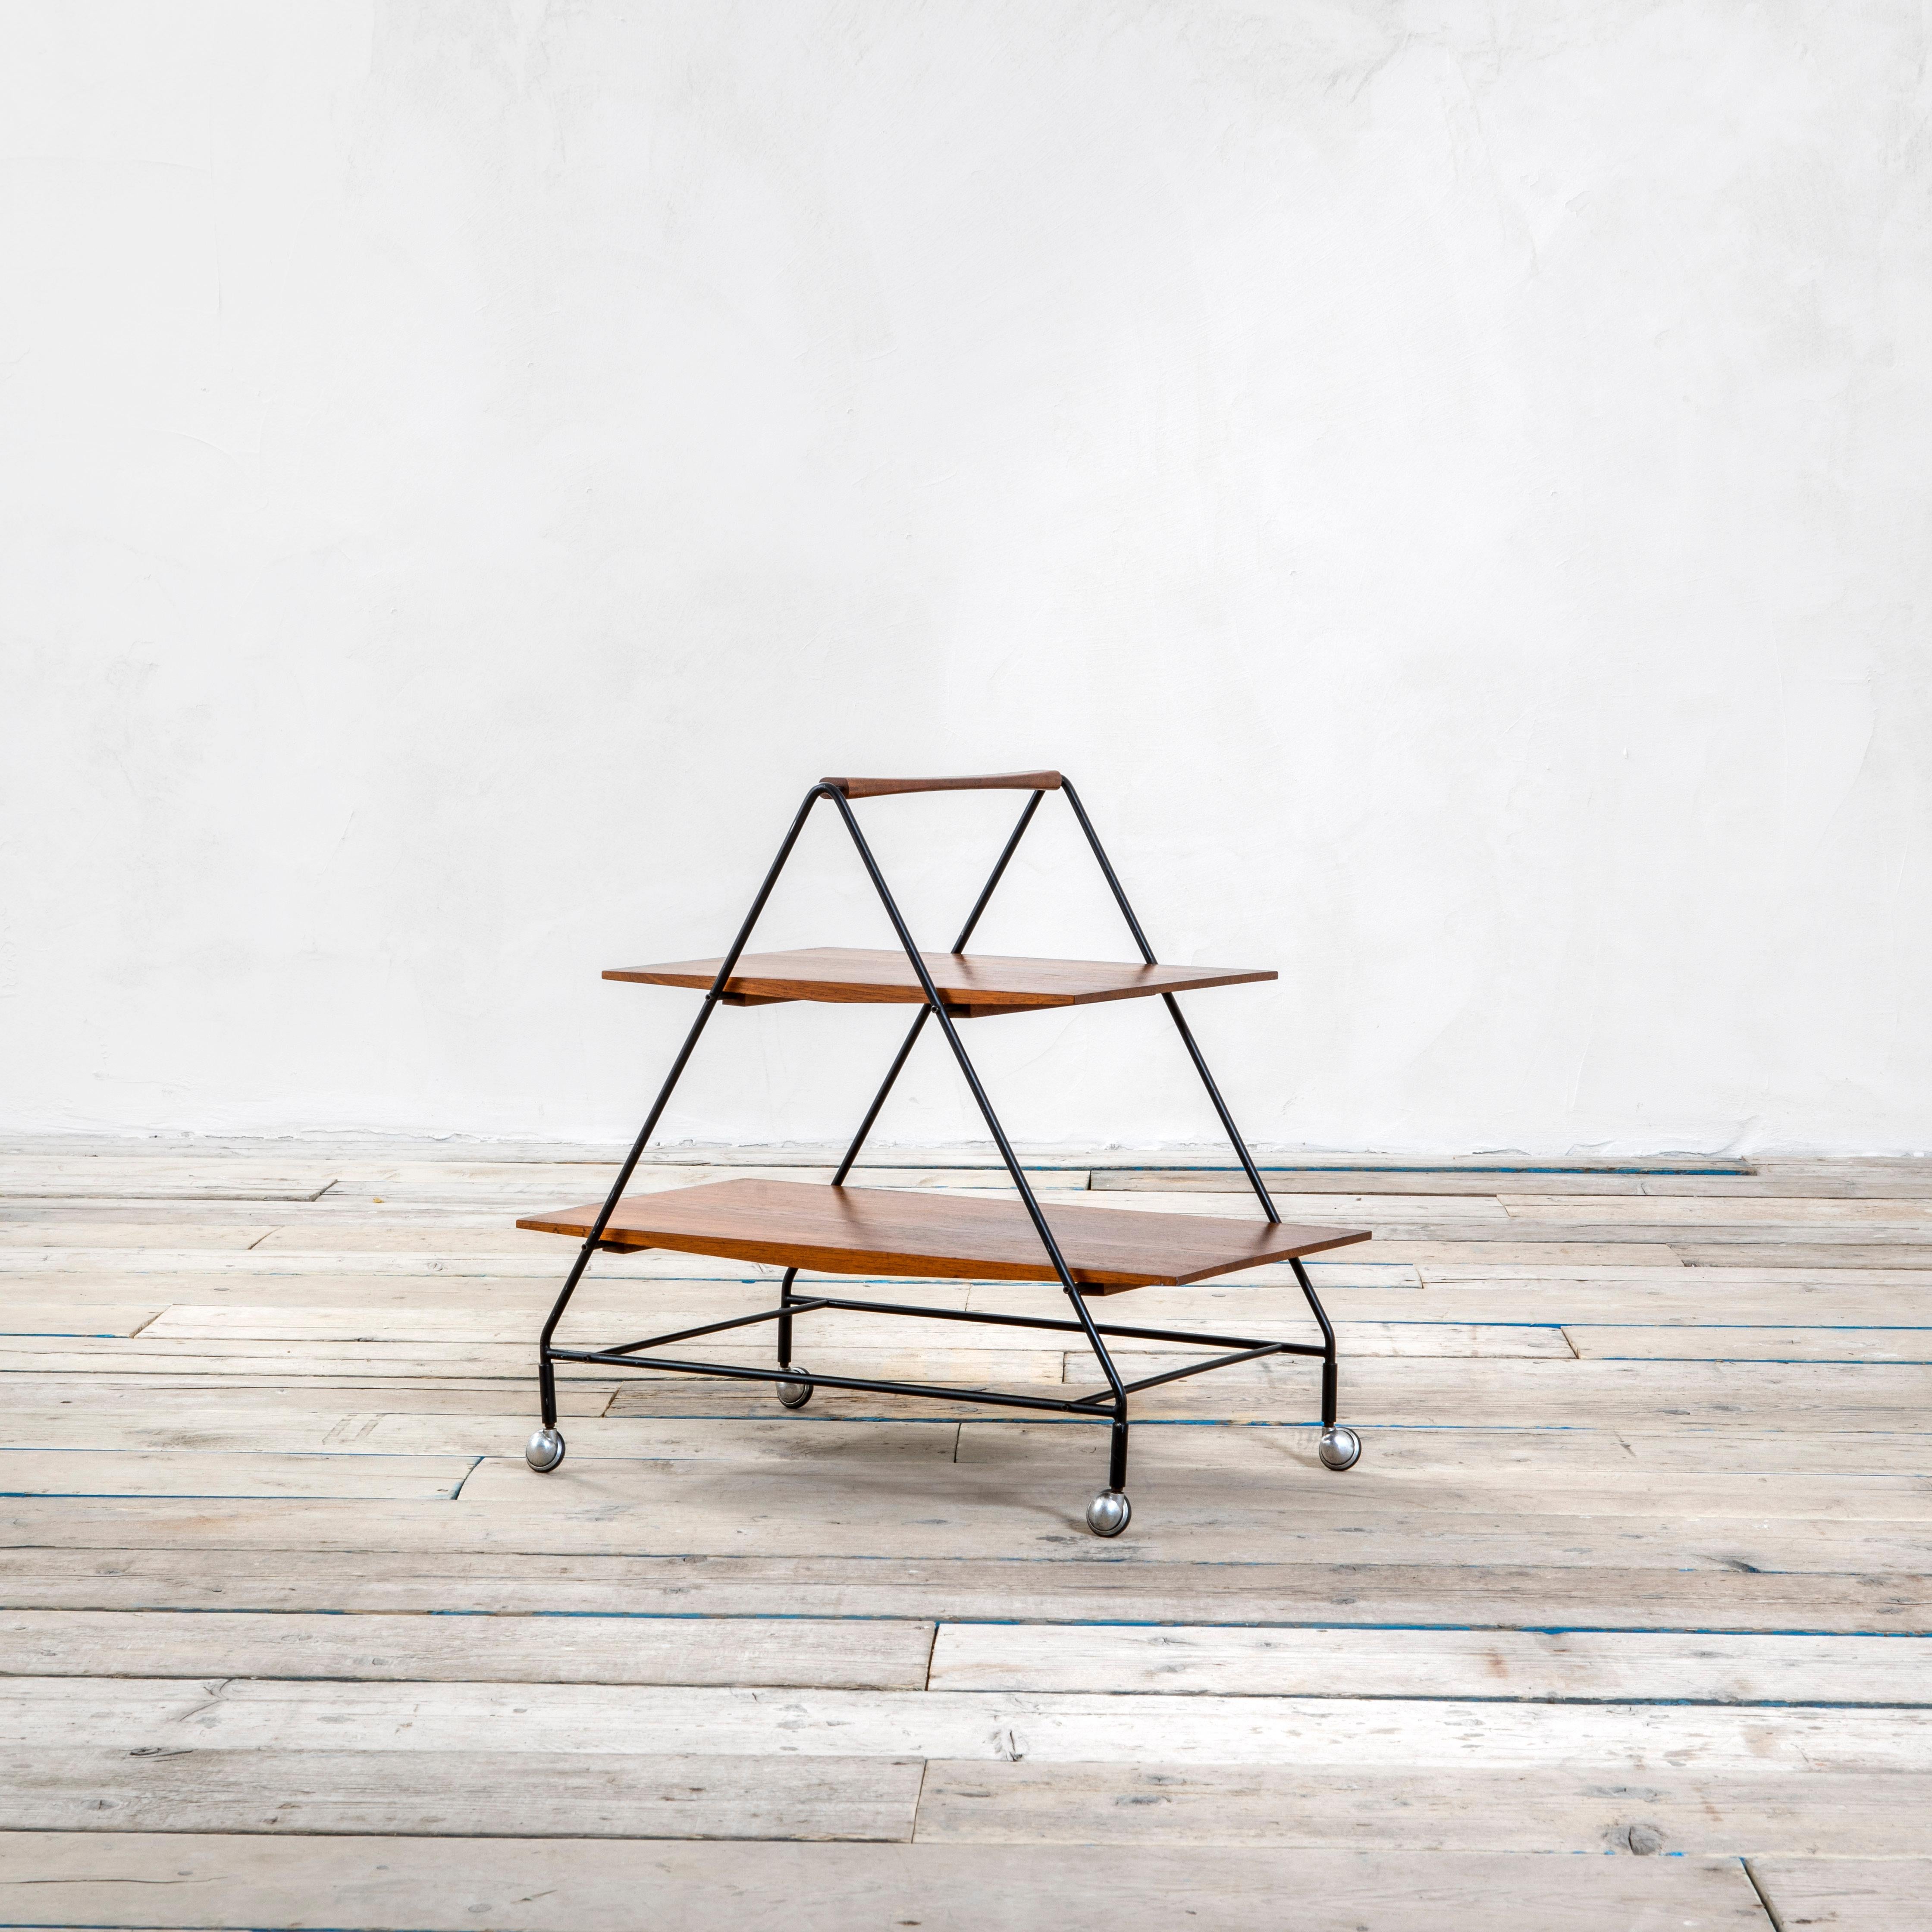 Bar cart designed in '60s by Ico Parisi for MIM Mobili Italiani Moderni. The Bar Cart has a lacquered metal structure with 2 trays in wood, the cart can be easily moved thanks to four wheels. On a tray there is the original brandmark MIM.
It can be